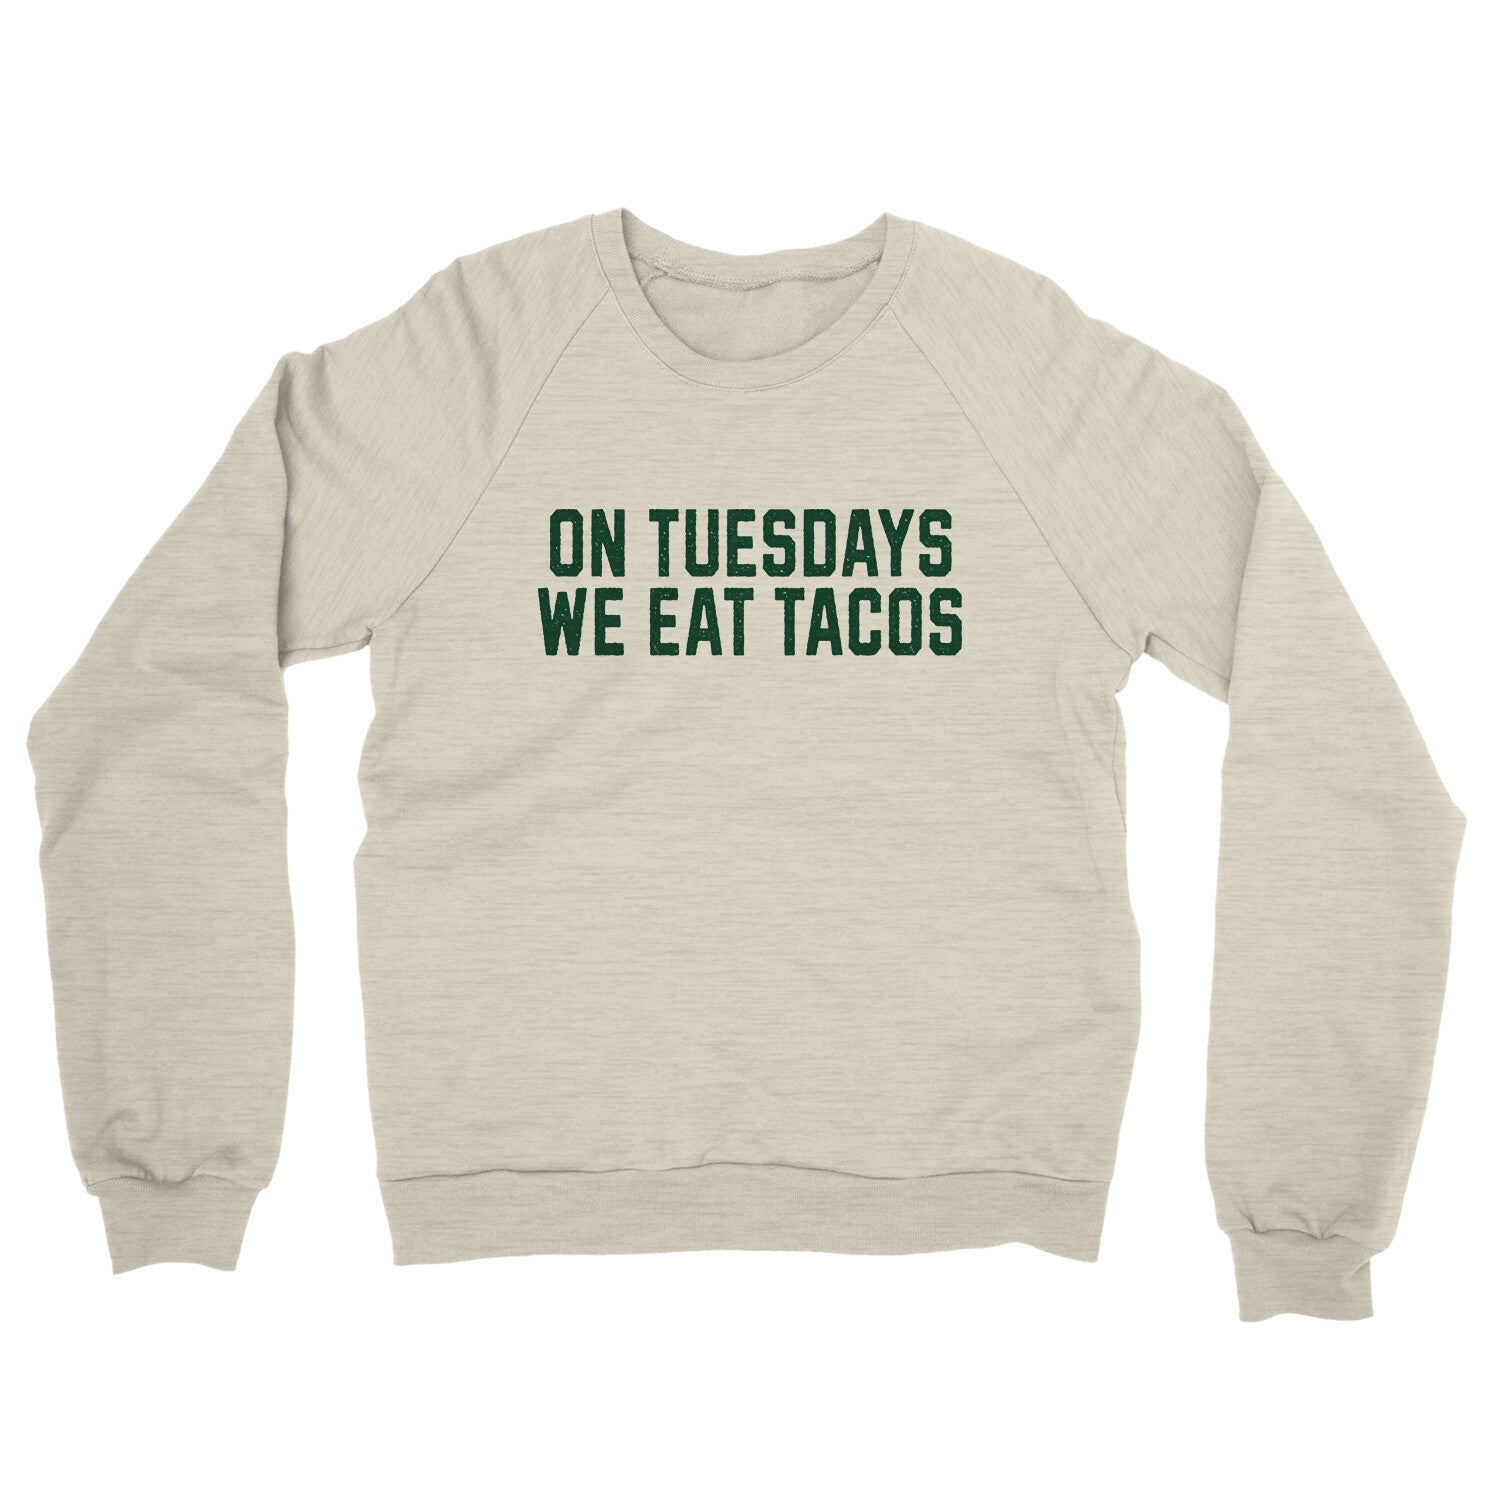 On Tuesdays We Eat Tacos in Heather Oatmeal Color